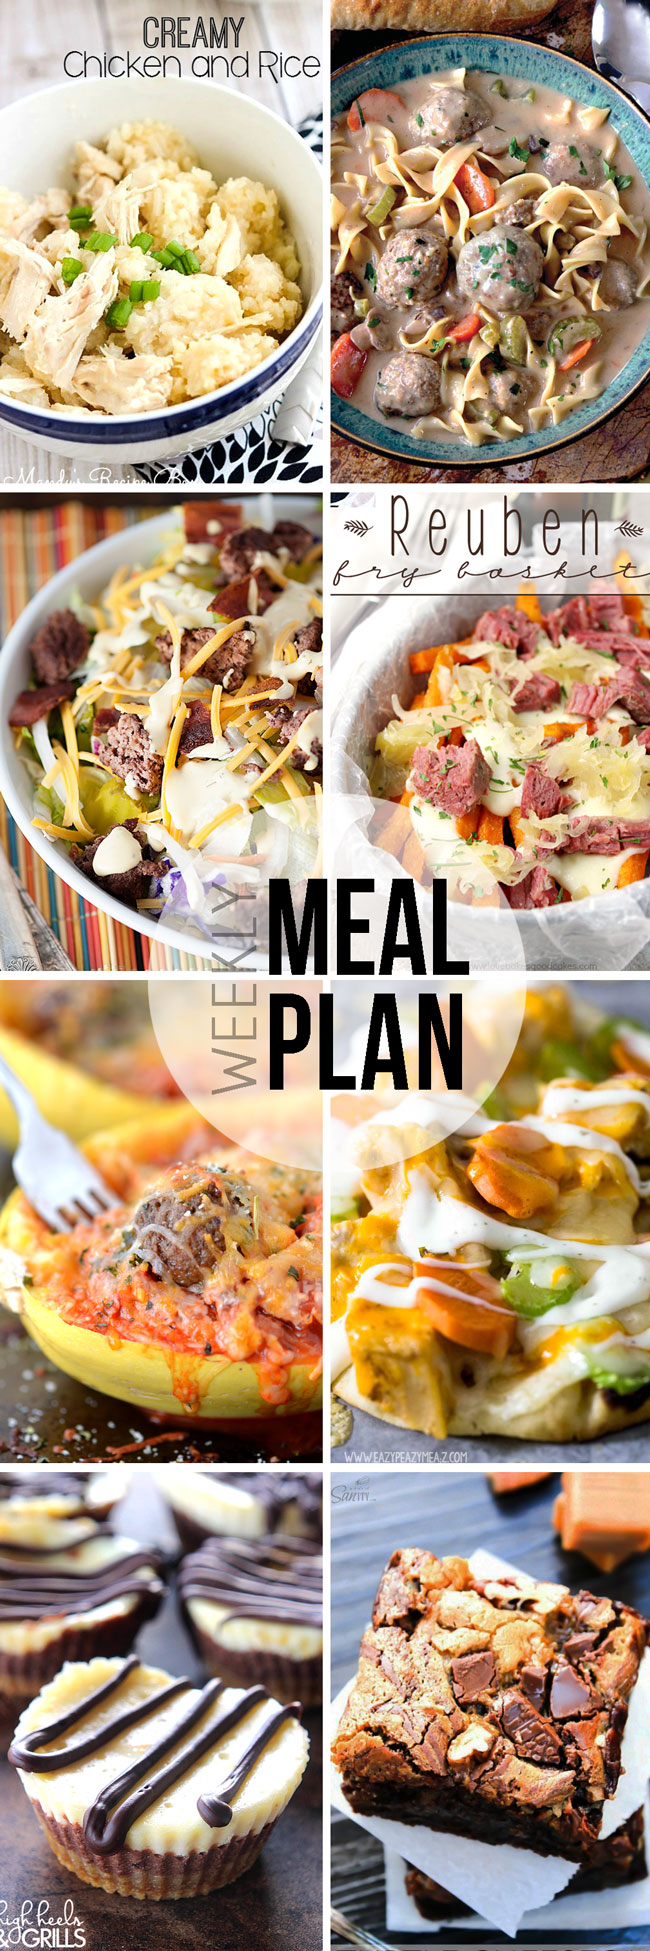 Meal plan full of easy to make delicious meals. 